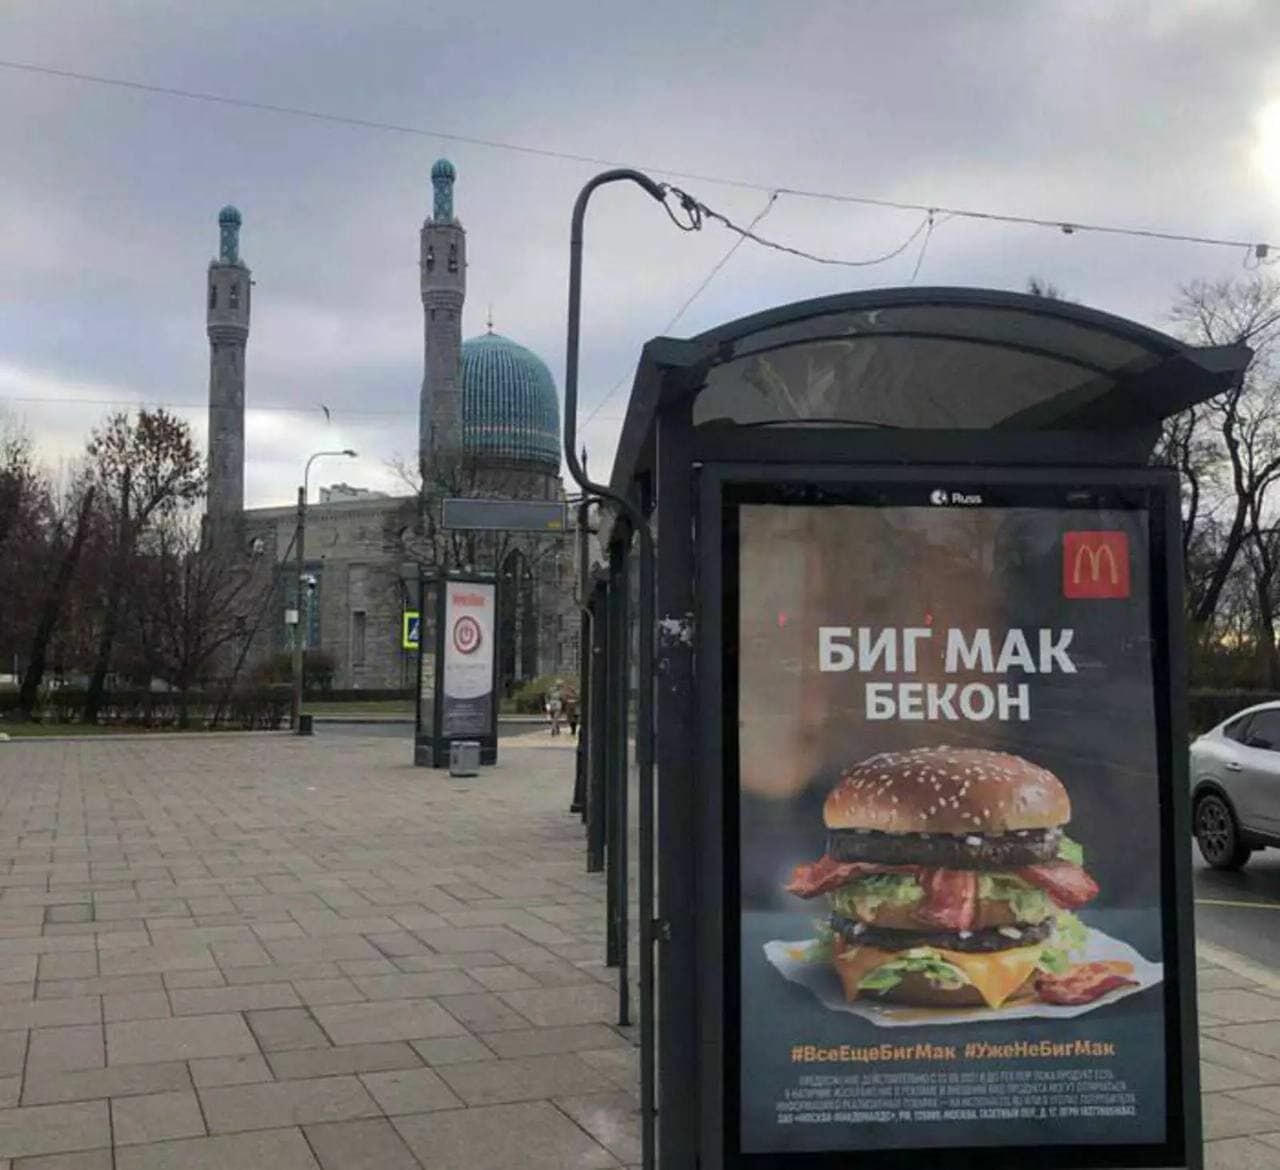 Once bitten twice shy: why McDonald's removed "offensive" ads